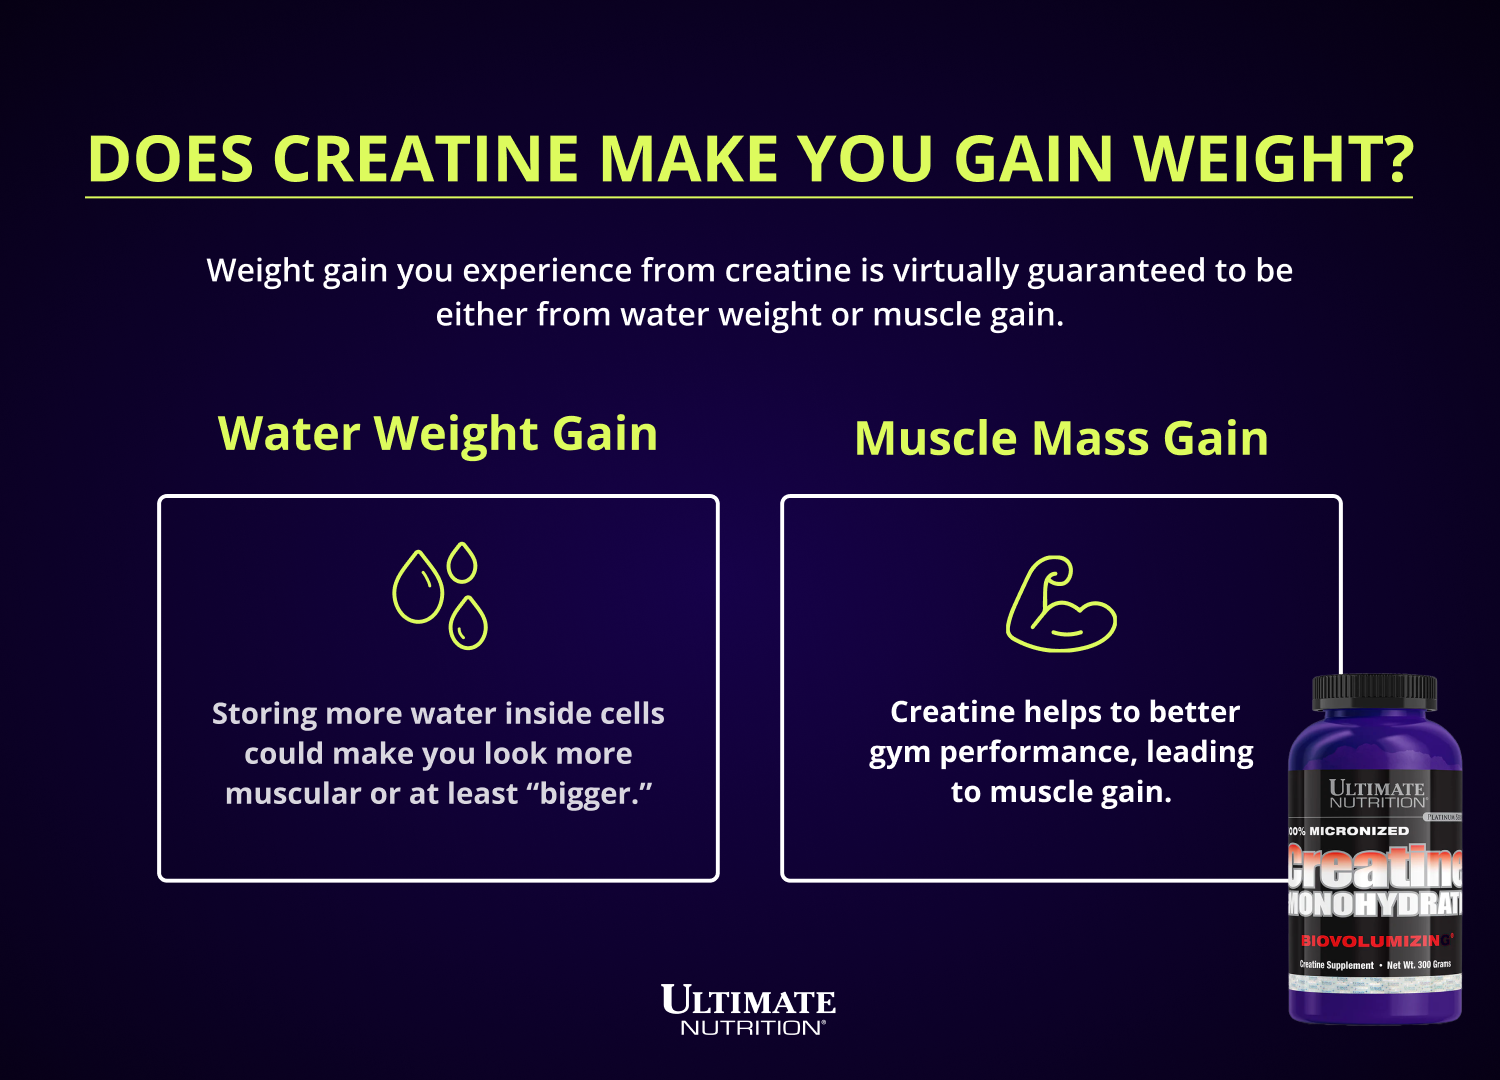 Does creatine make you gain weight?